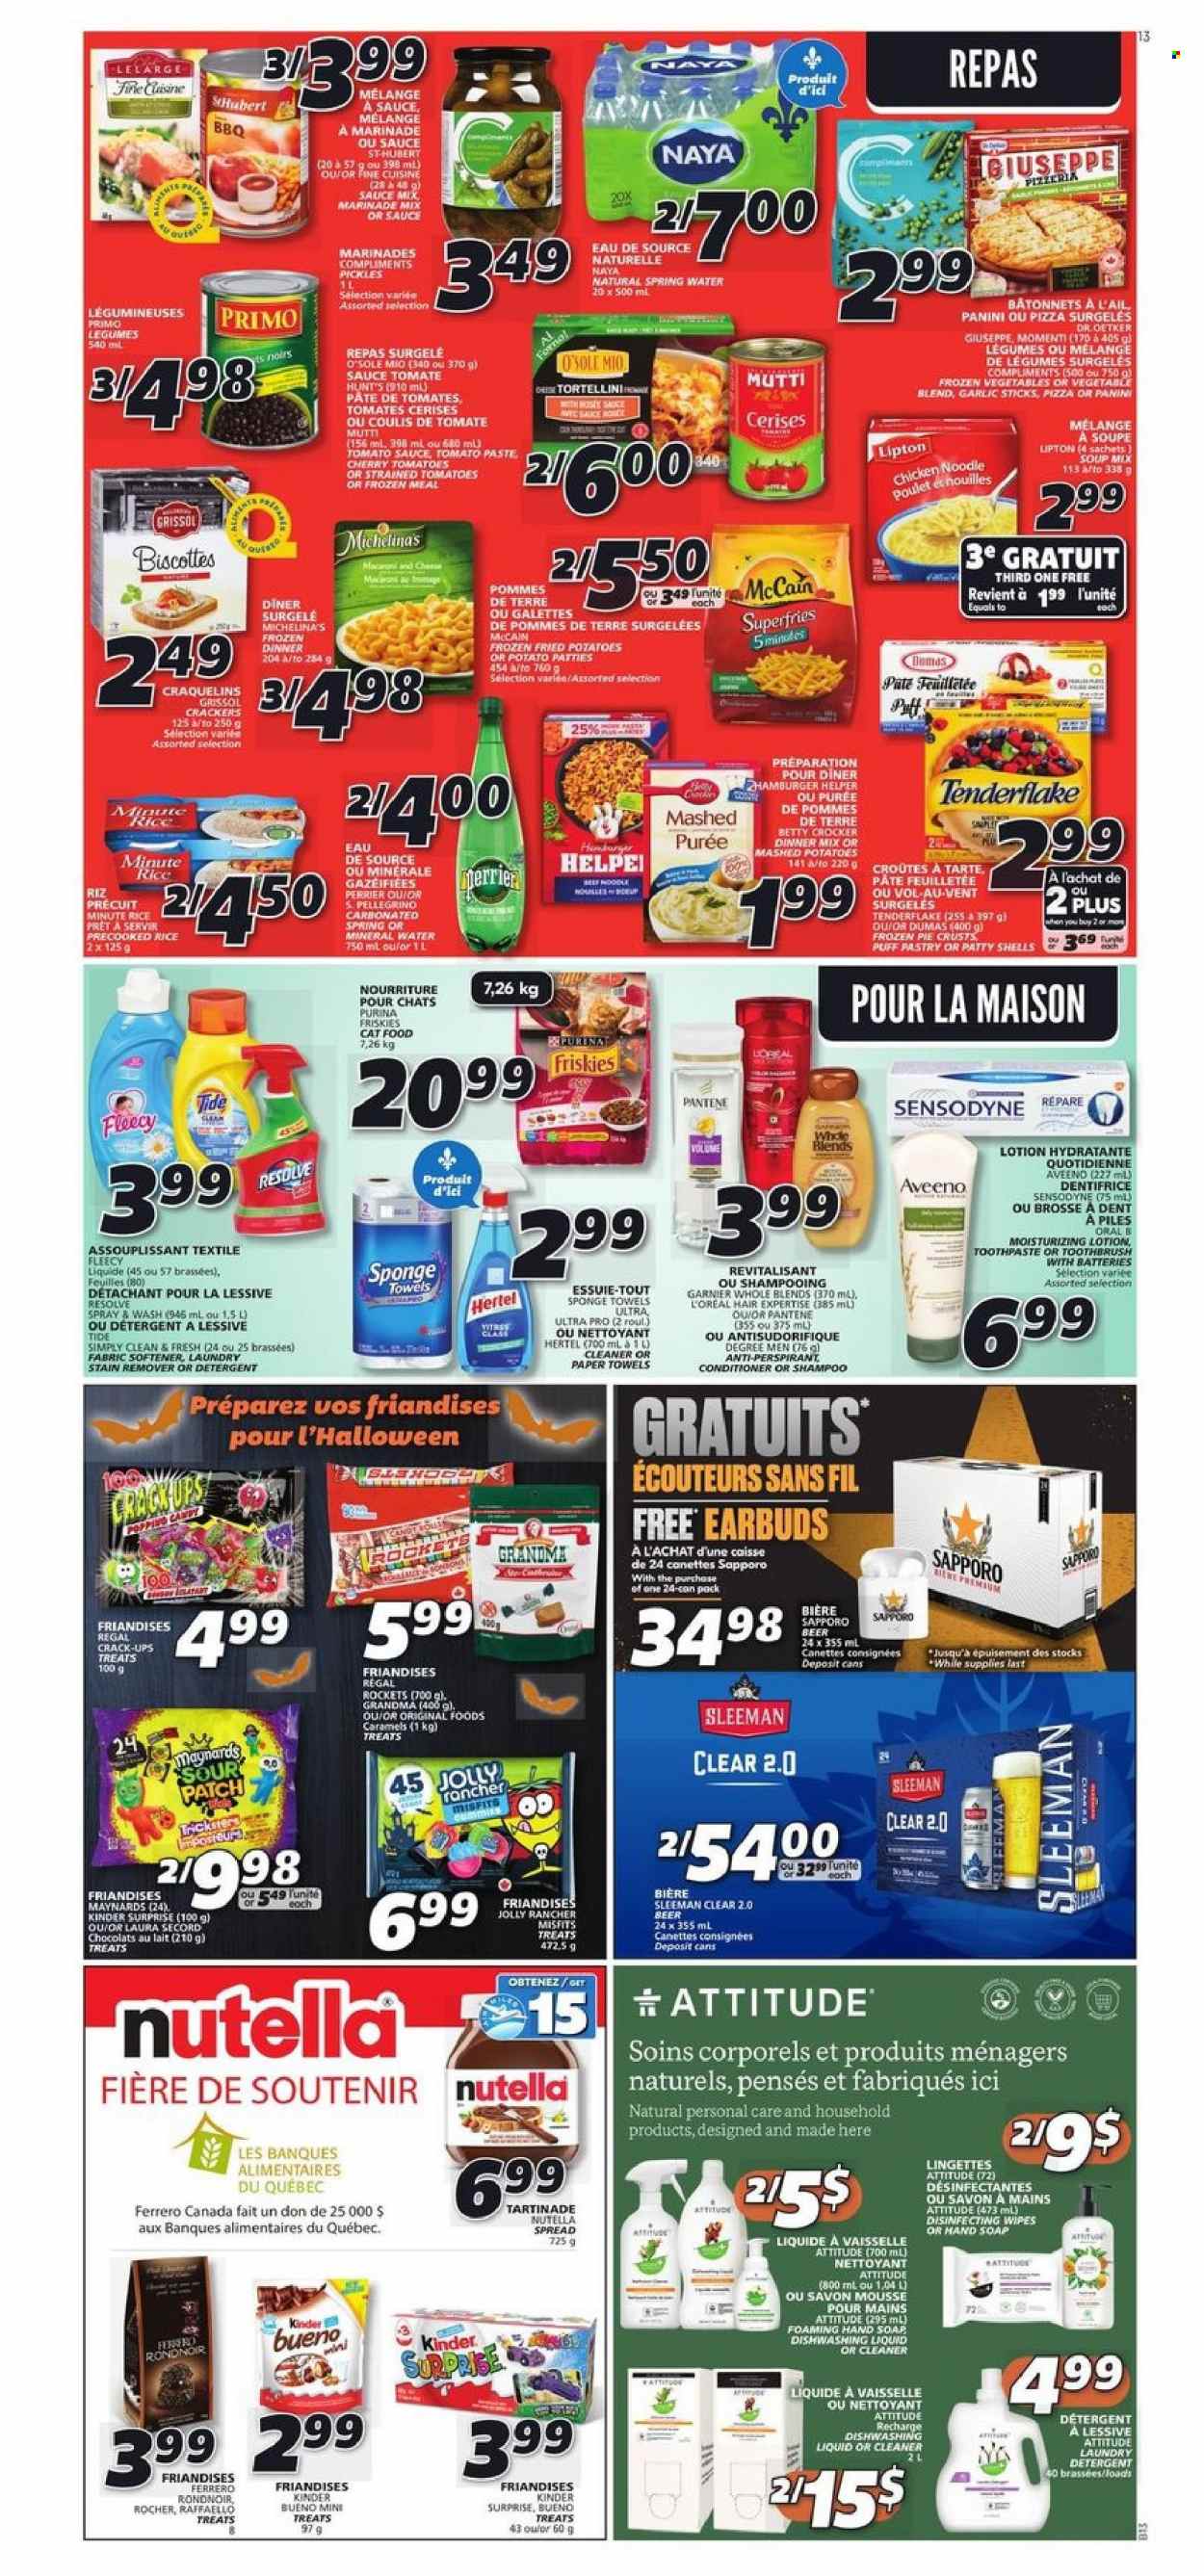 thumbnail - IGA Flyer - October 21, 2021 - October 27, 2021 - Sales products - pie, panini, garlic, cherries, macaroni & cheese, mashed potatoes, pizza, soup mix, soup, tortellini, noodles, Dr. Oetker, puff pastry, frozen vegetables, McCain, potato fries, Kinder Surprise, Raffaello, crackers, Kinder Bueno, pie crust, tomato paste, tomato sauce, pickles, rice, marinade, Perrier, mineral water, spring water, San Pellegrino, beer, Garnier, Nutella, Oral-B, Sensodyne, Lipton, Ferrero Rocher. Page 10.